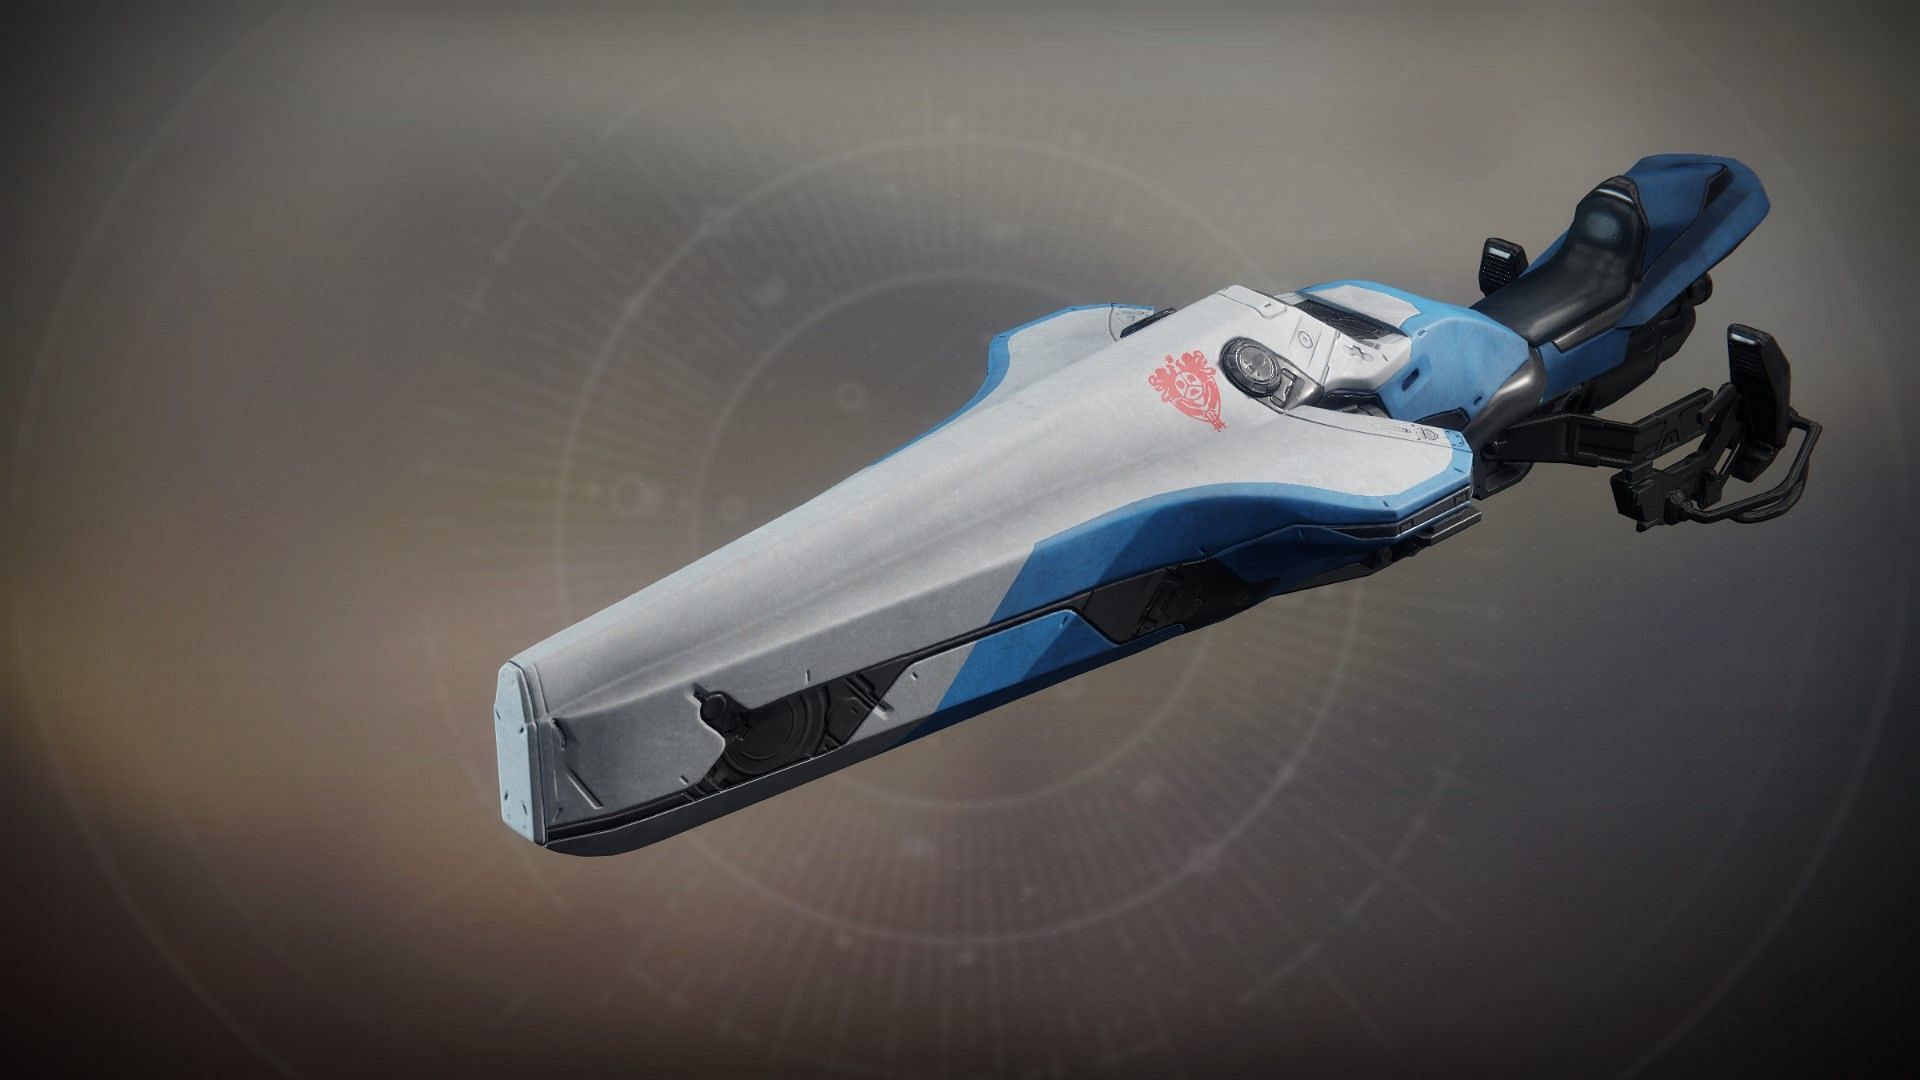 The calm and sturdy look of the August Courser (Source: Bungie)